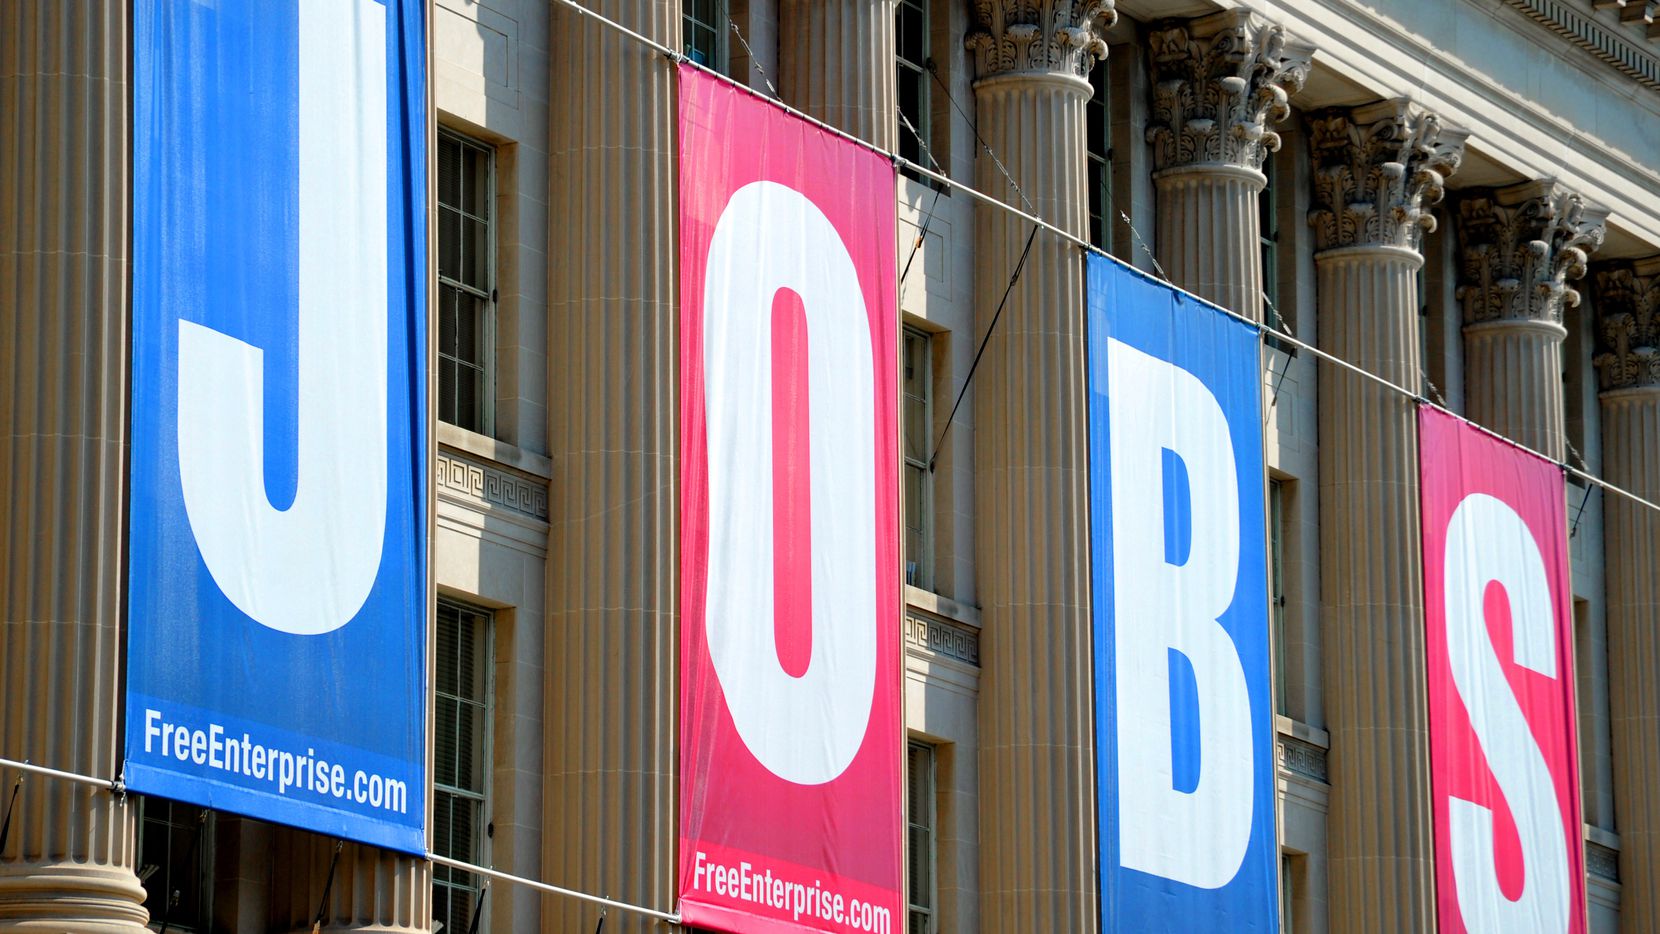 Employers have eliminated over 16,000 jobs in Texas this year, as economic pressures push...